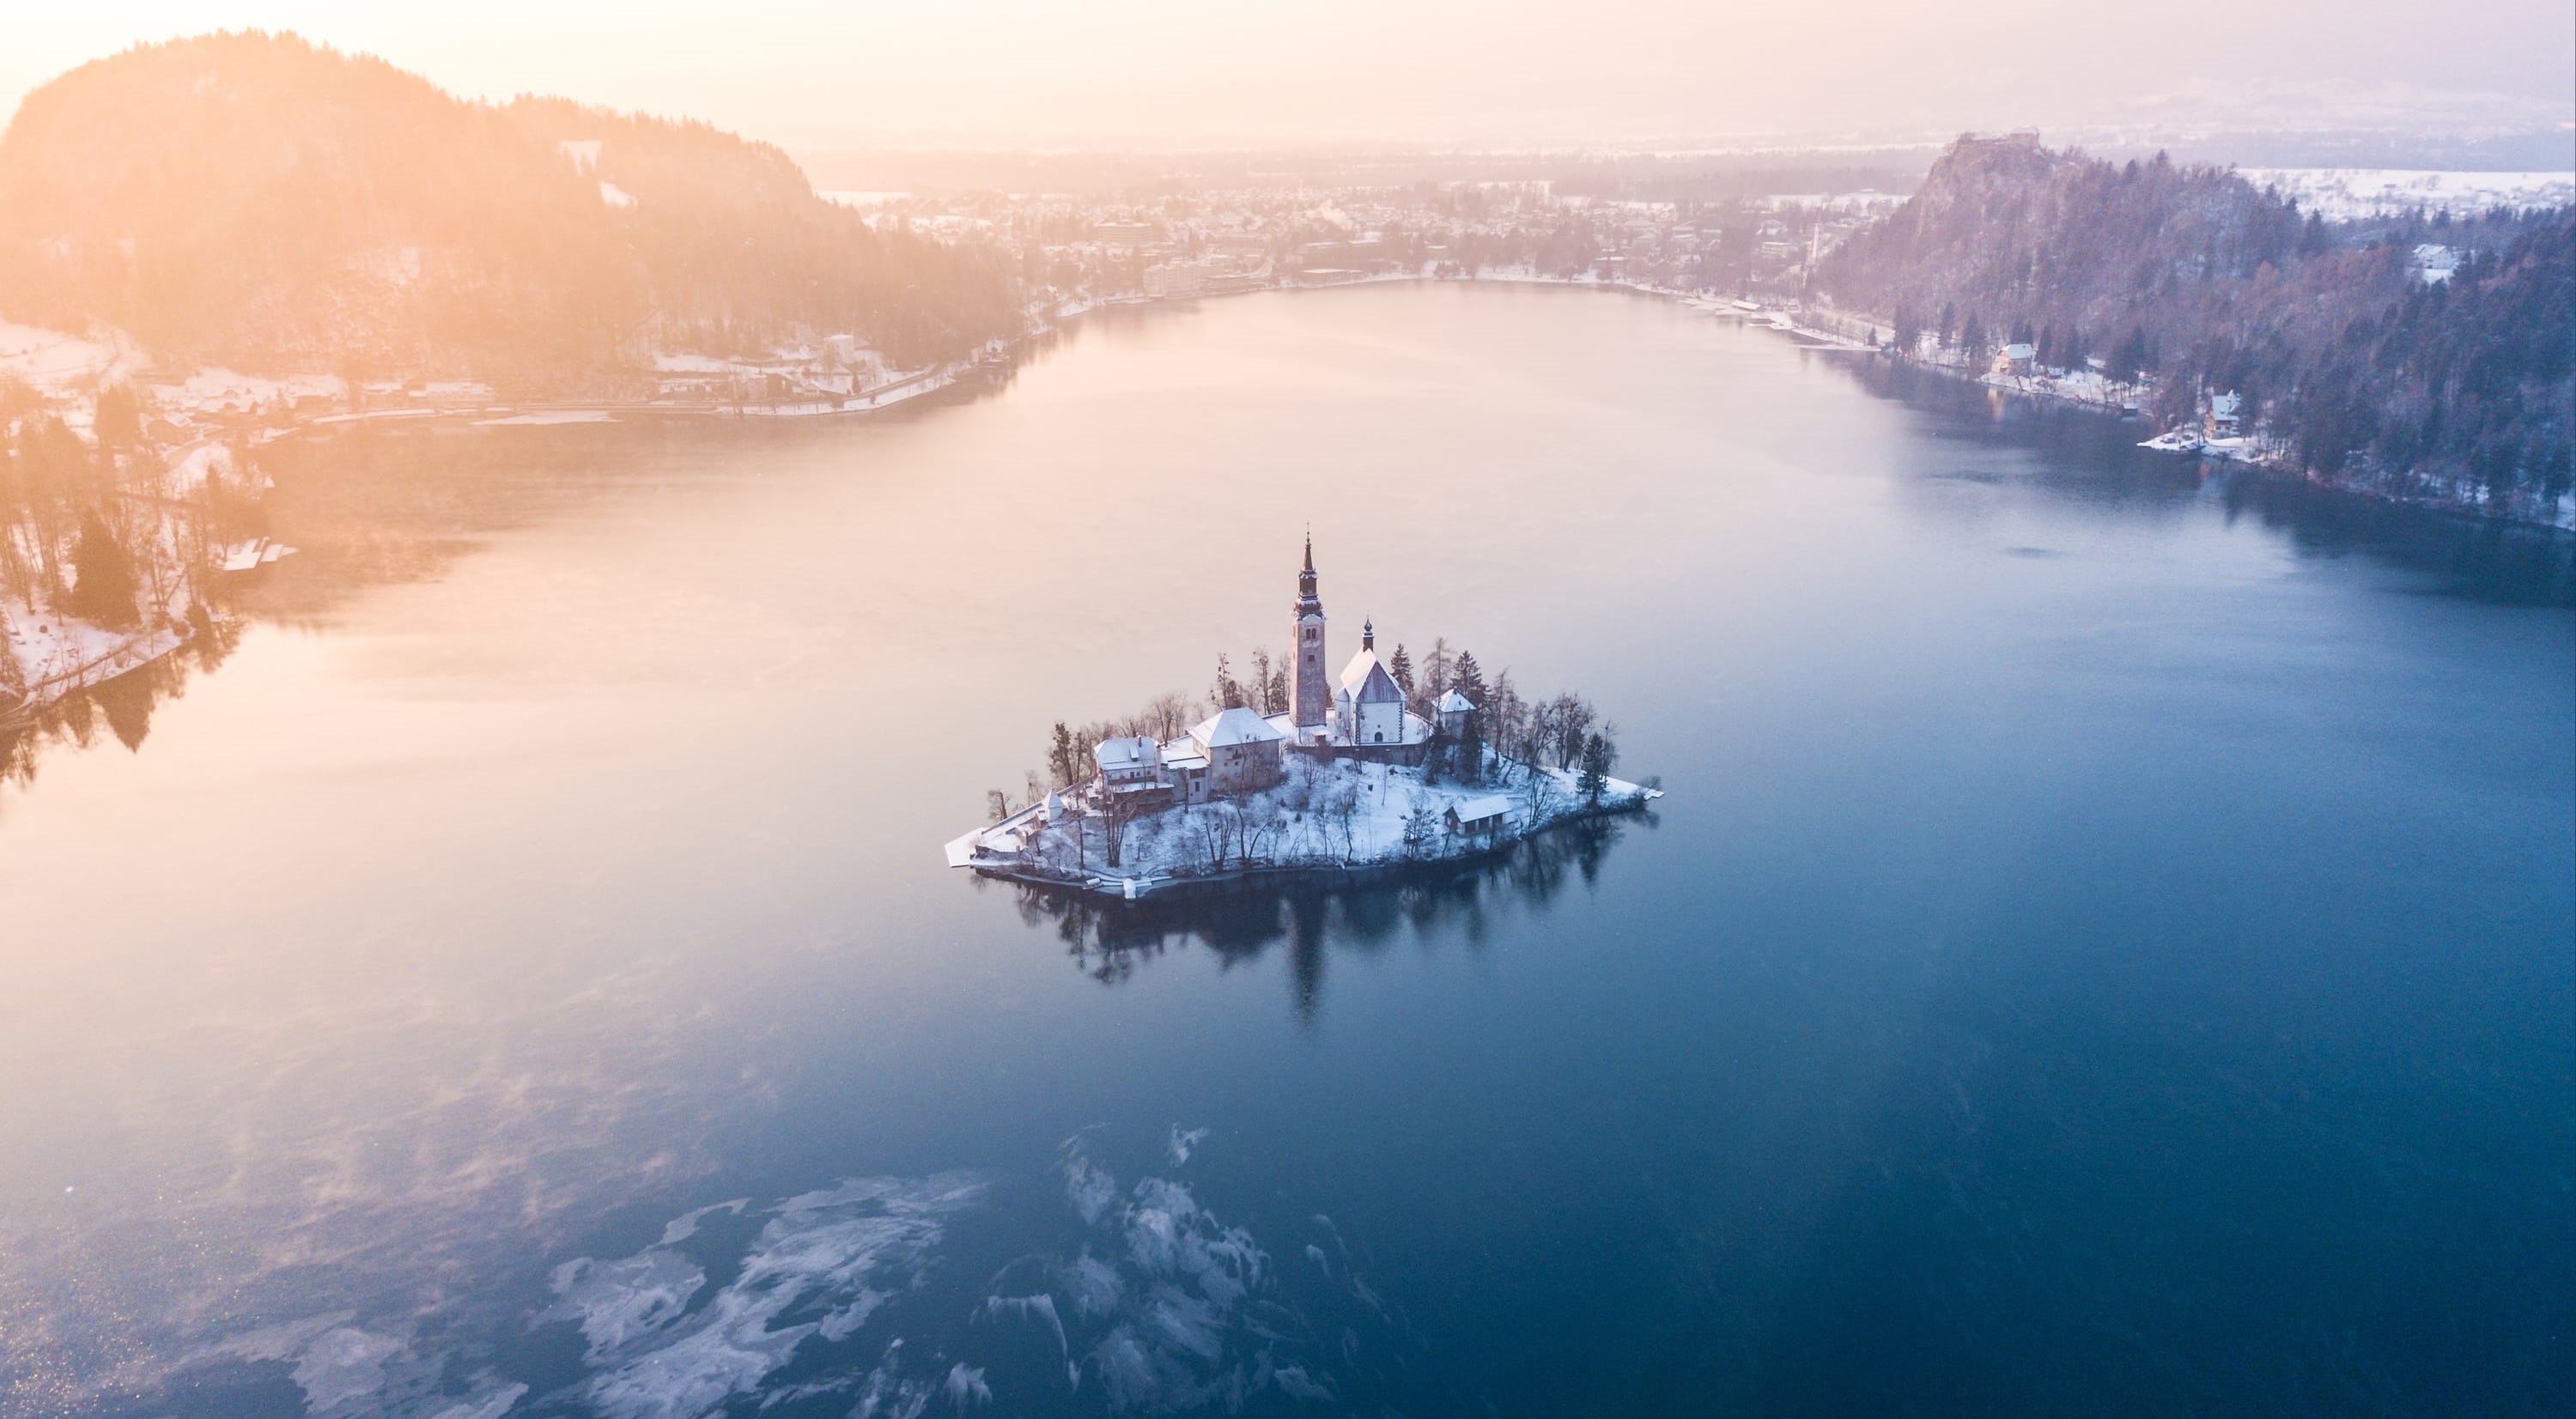 One of the top 10 winter destinations on Instagram (Lonely Planet)